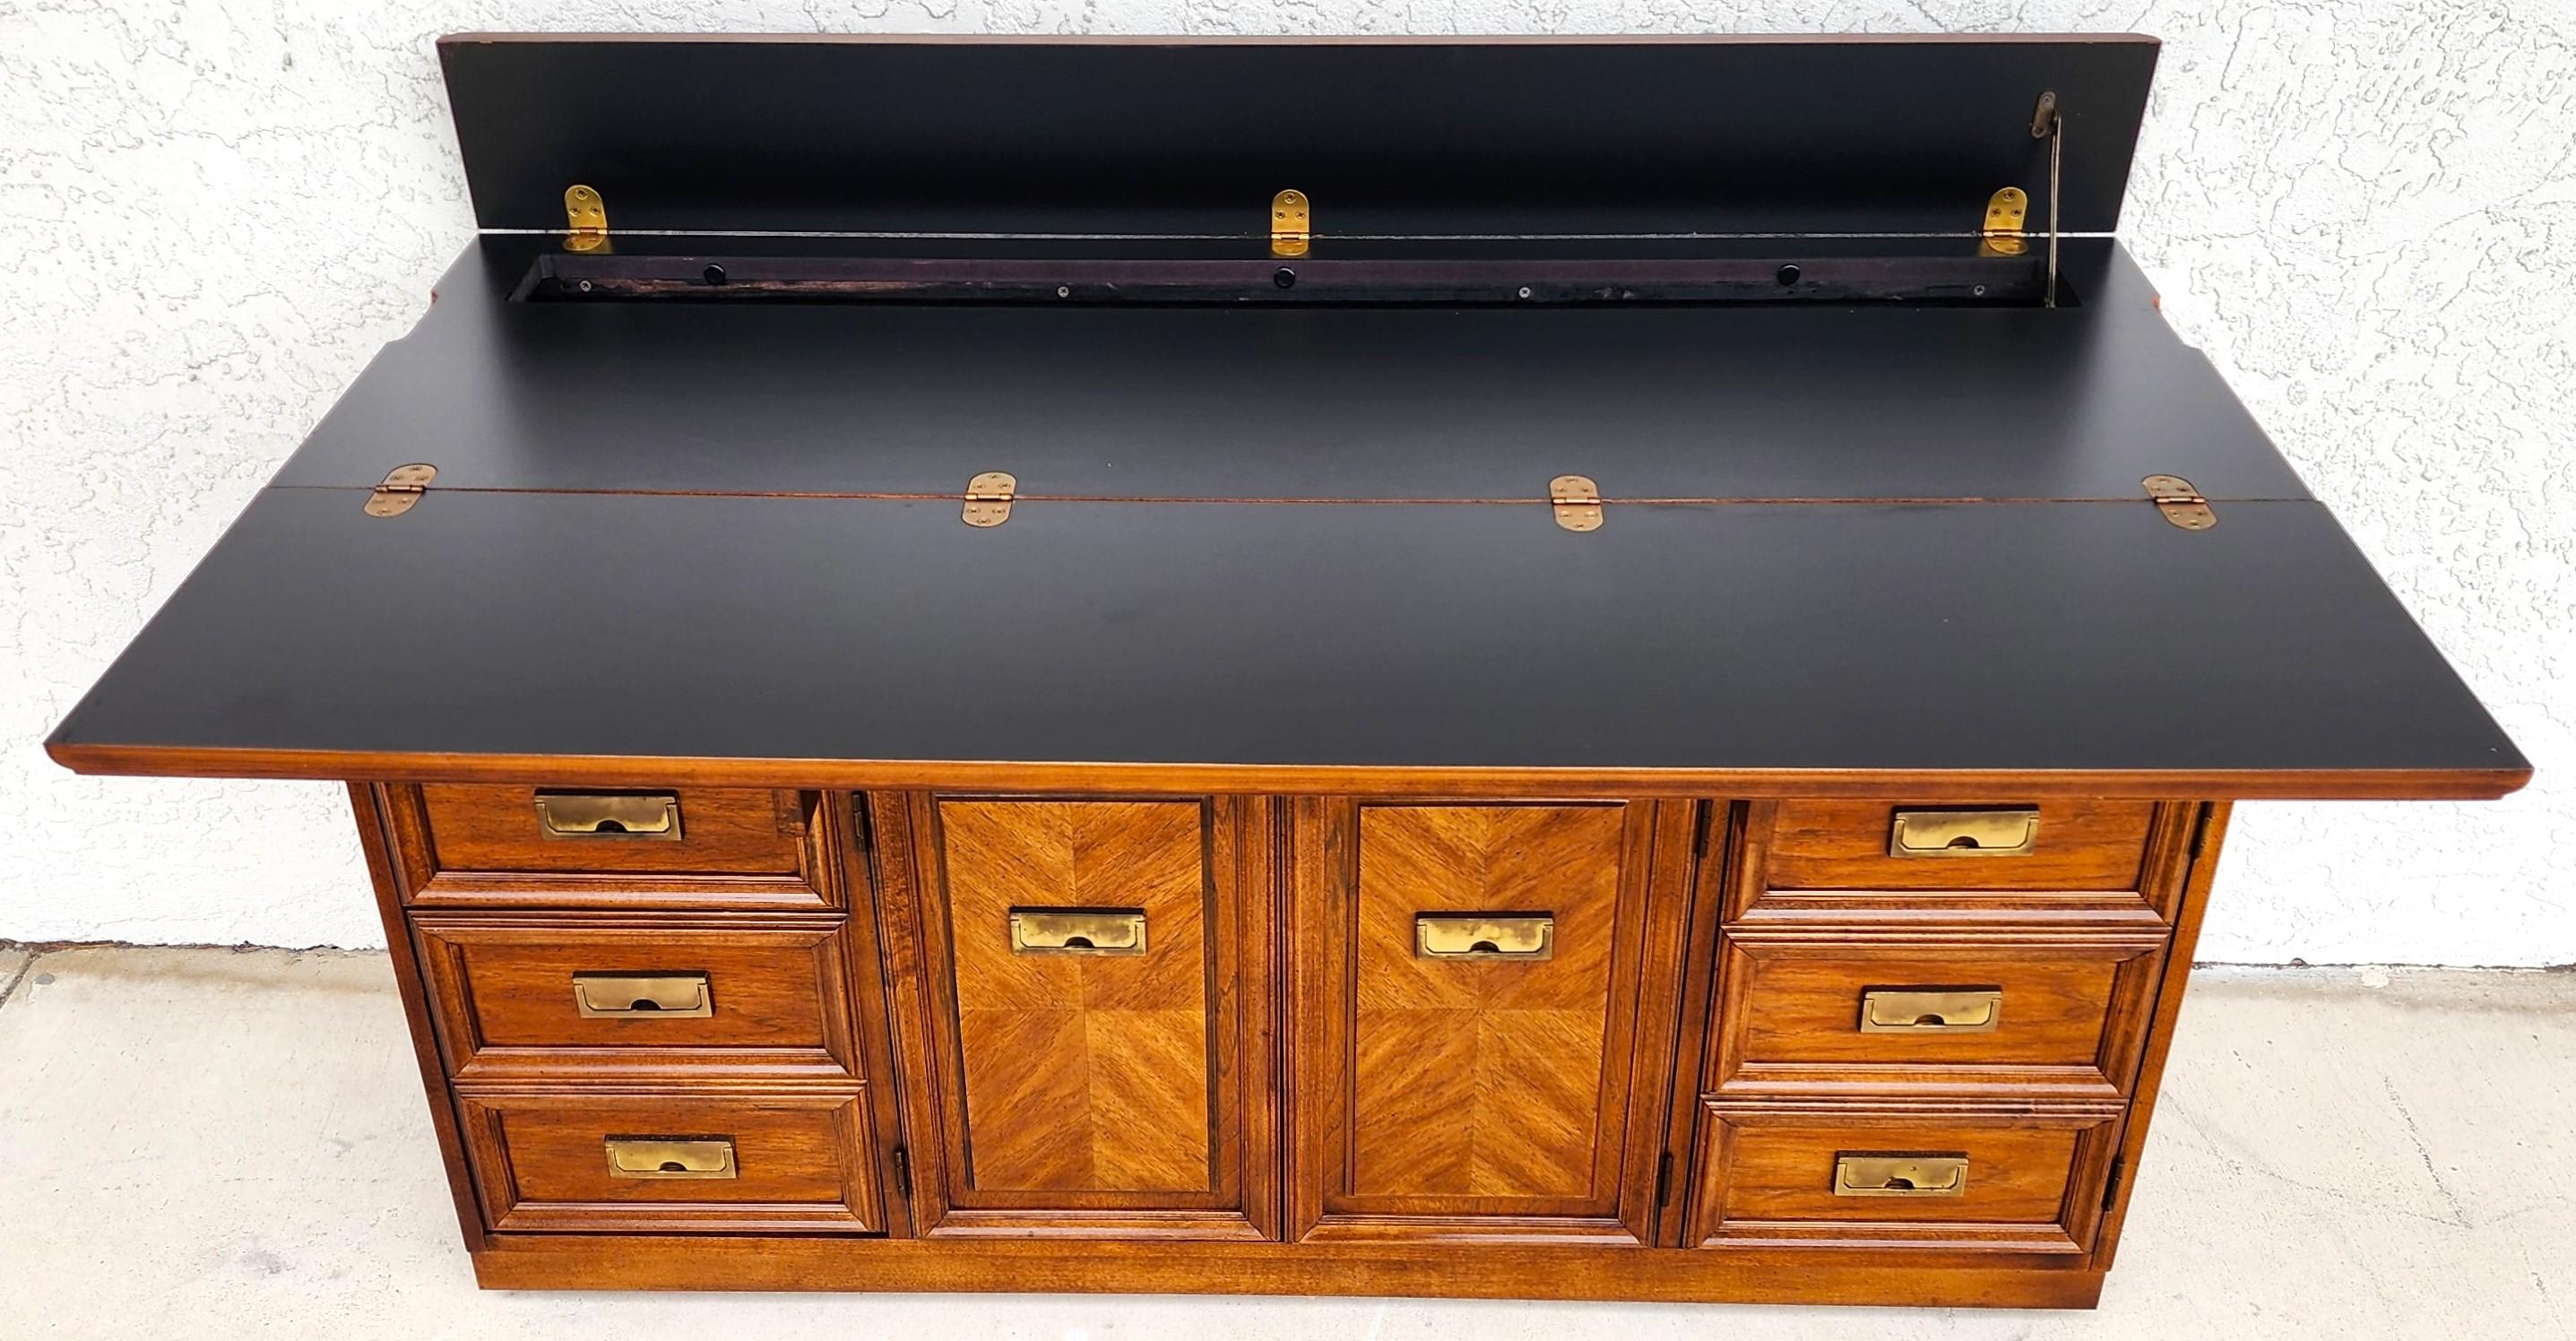 For FULL item description click on CONTINUE READING at the bottom of this page.

Offering One Of Our Recent Palm Beach Estate Fine Furniture Acquisitions Of A
Vintage 1970s MCM Campaign Style Flip Top Rolling Sideboard Bar Buffet by